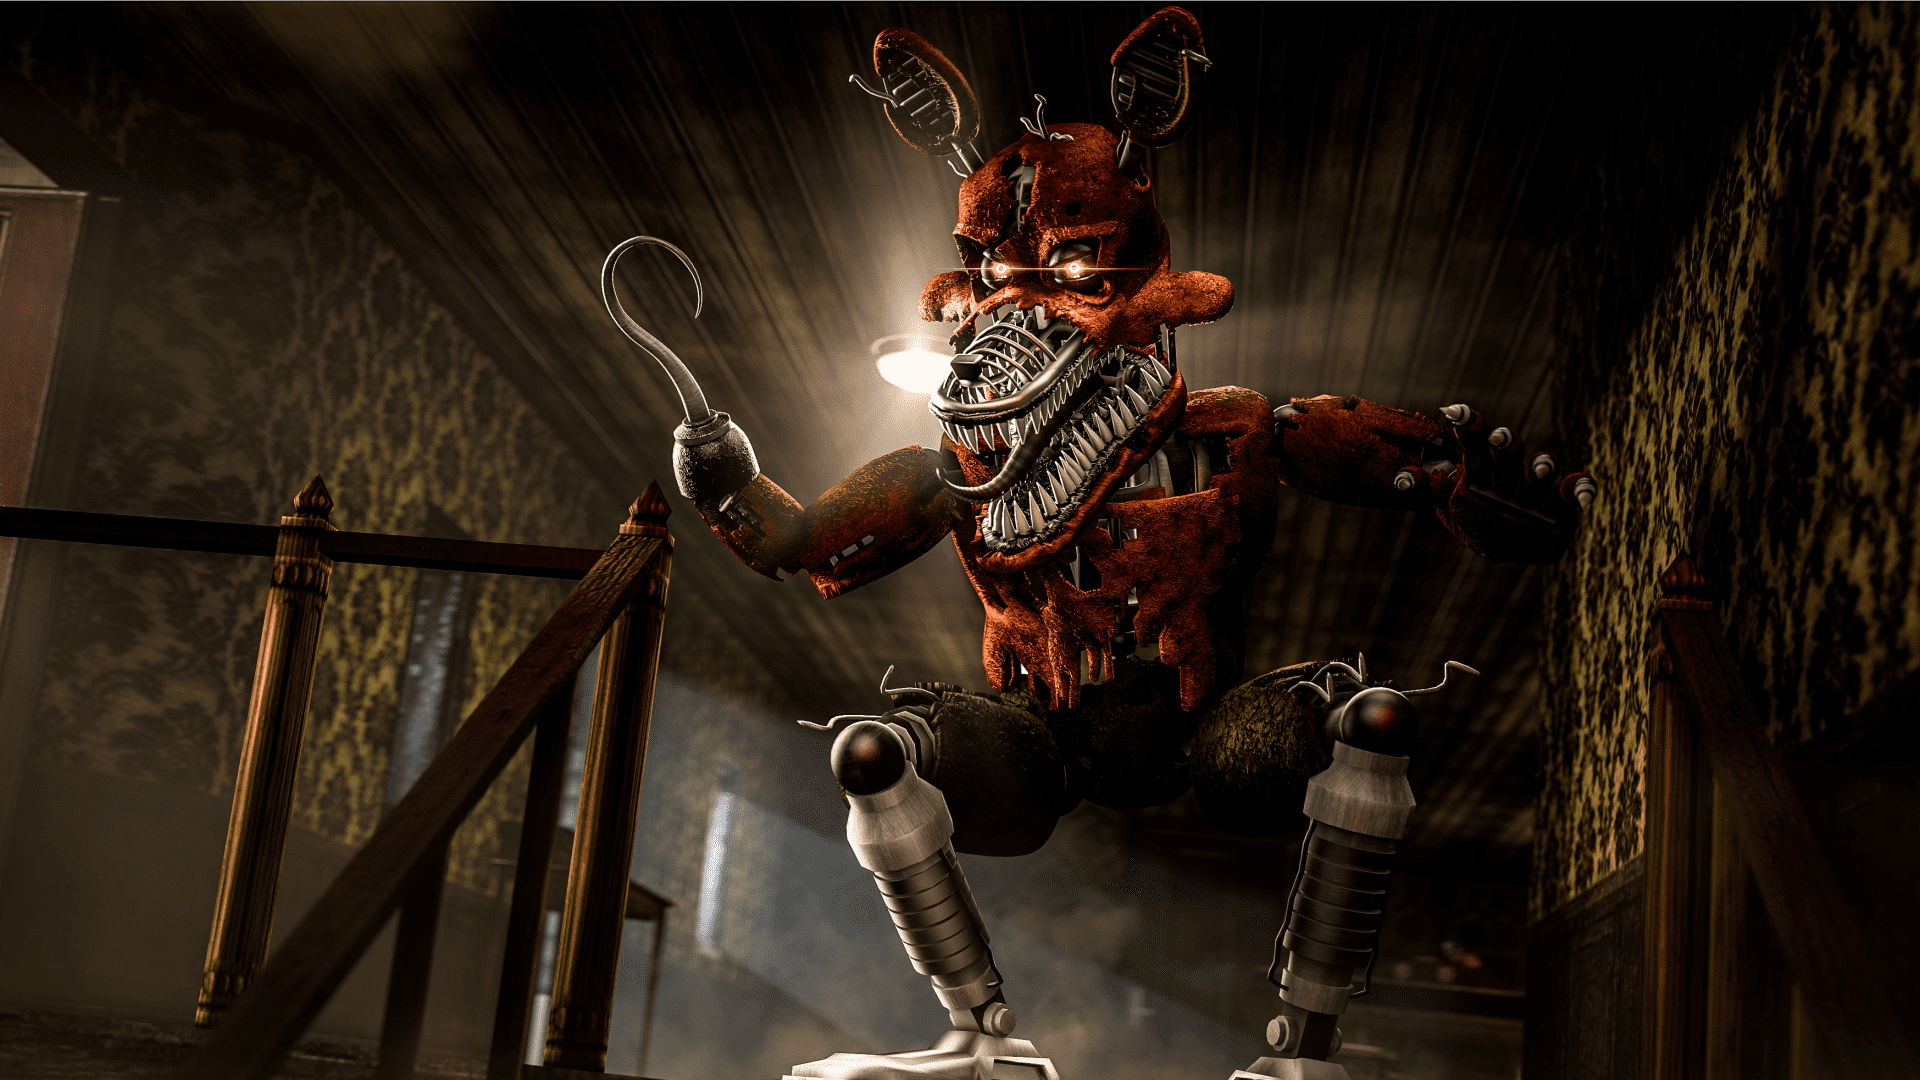 Download Fnaf Wallpapers on 24wallpapers.